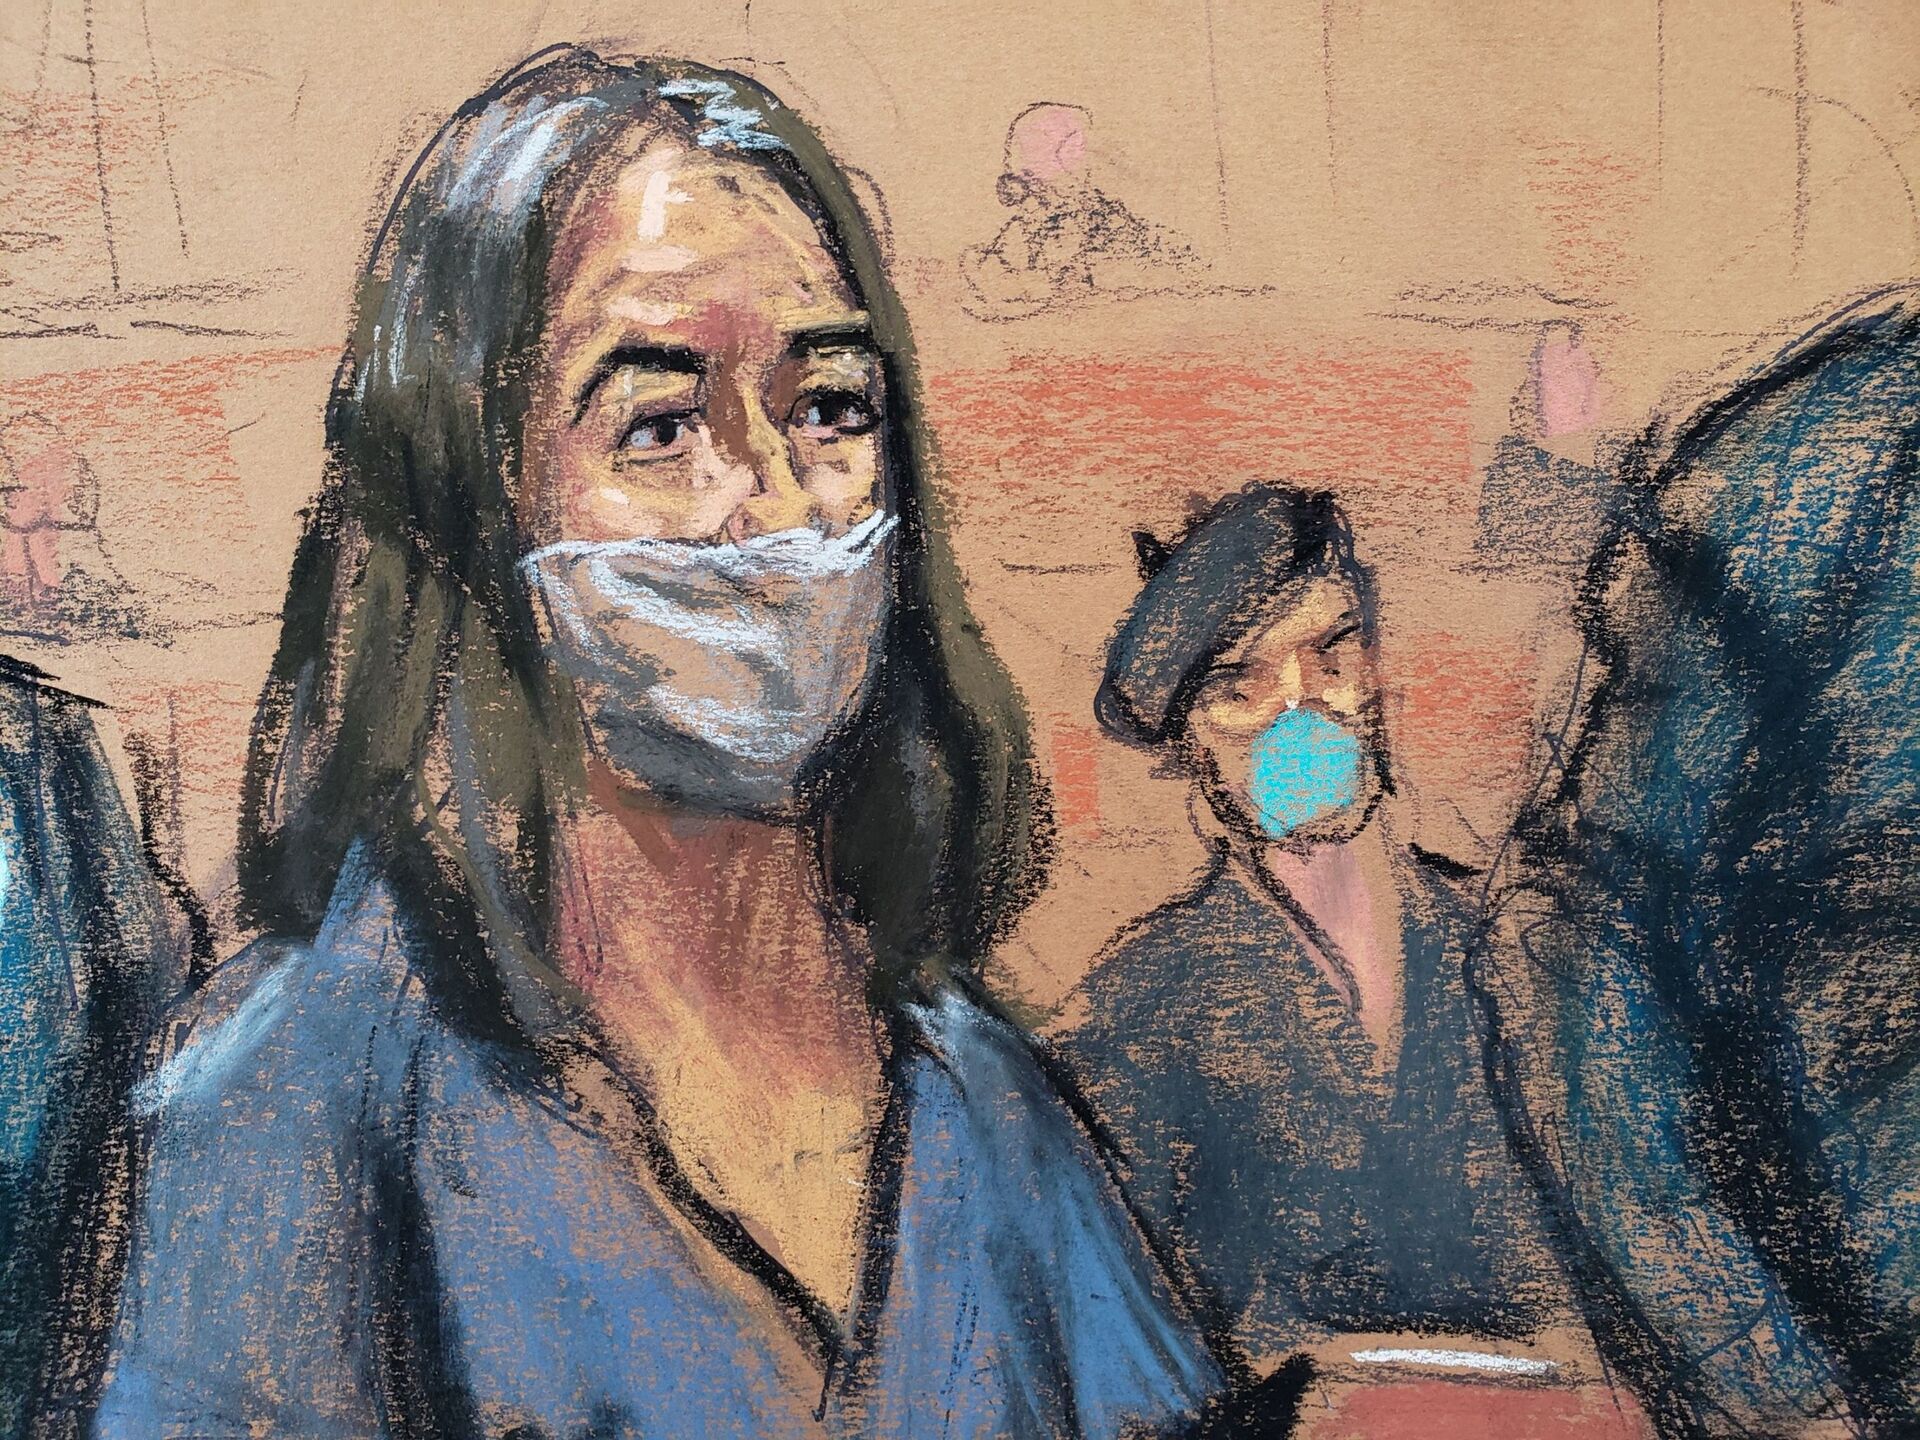 British socialite Ghislaine Maxwell appears during her arraignment hearing on a new indictment at Manhattan Federal Court in New York City, New York, U.S. April 23, 2021, in this courtroom sketch.  - Sputnik International, 1920, 30.10.2021